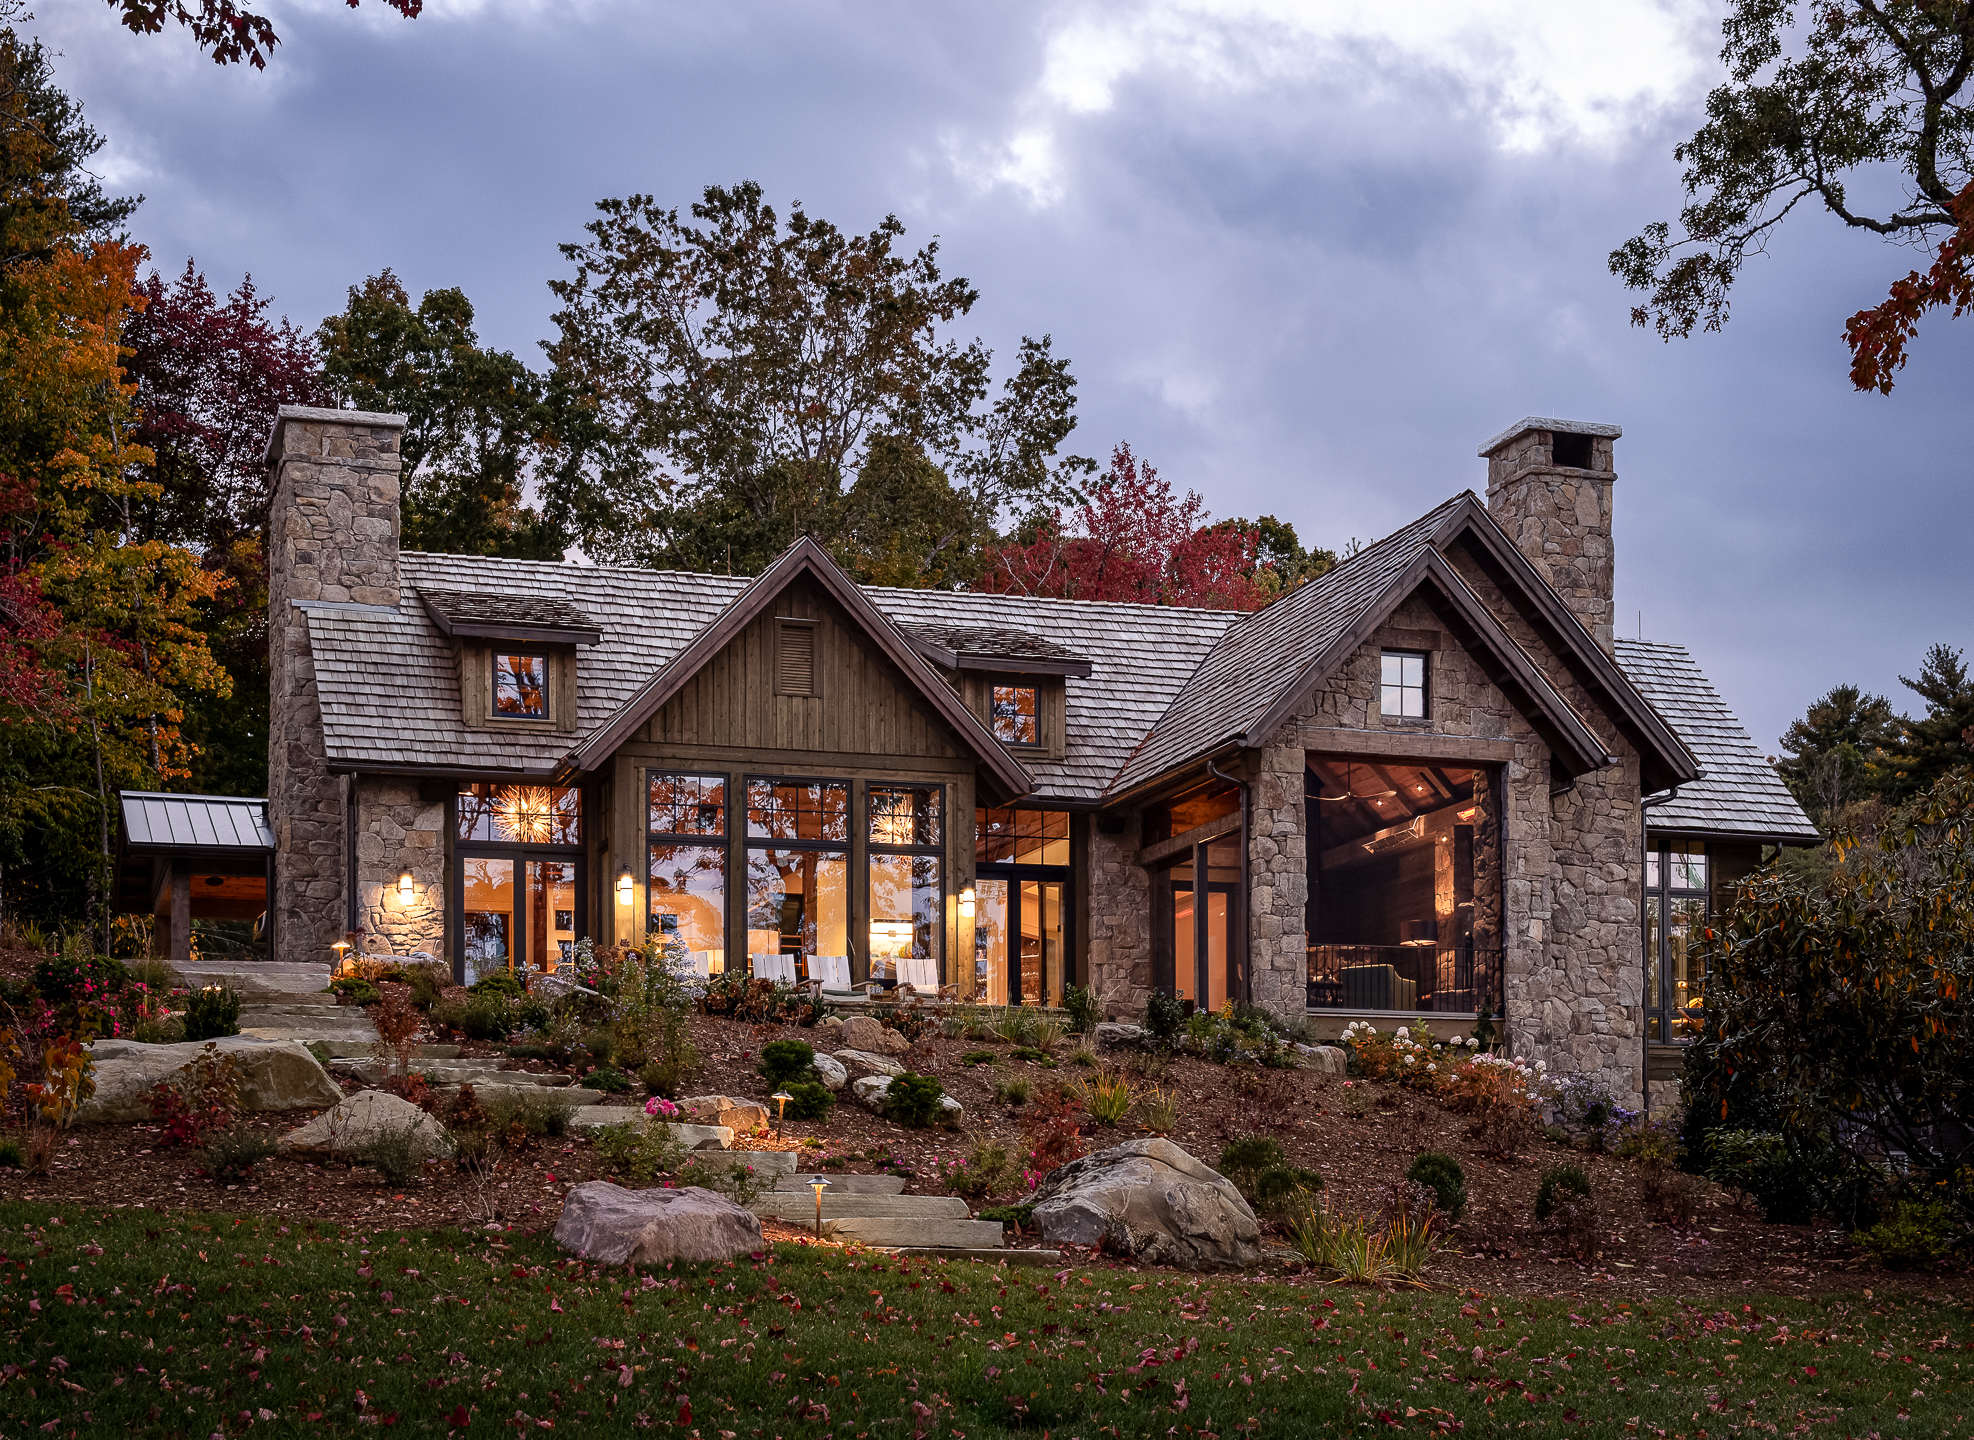 A stone home in the woods at dusk. captured by professional architectural photographer in Asheville, North Carolina